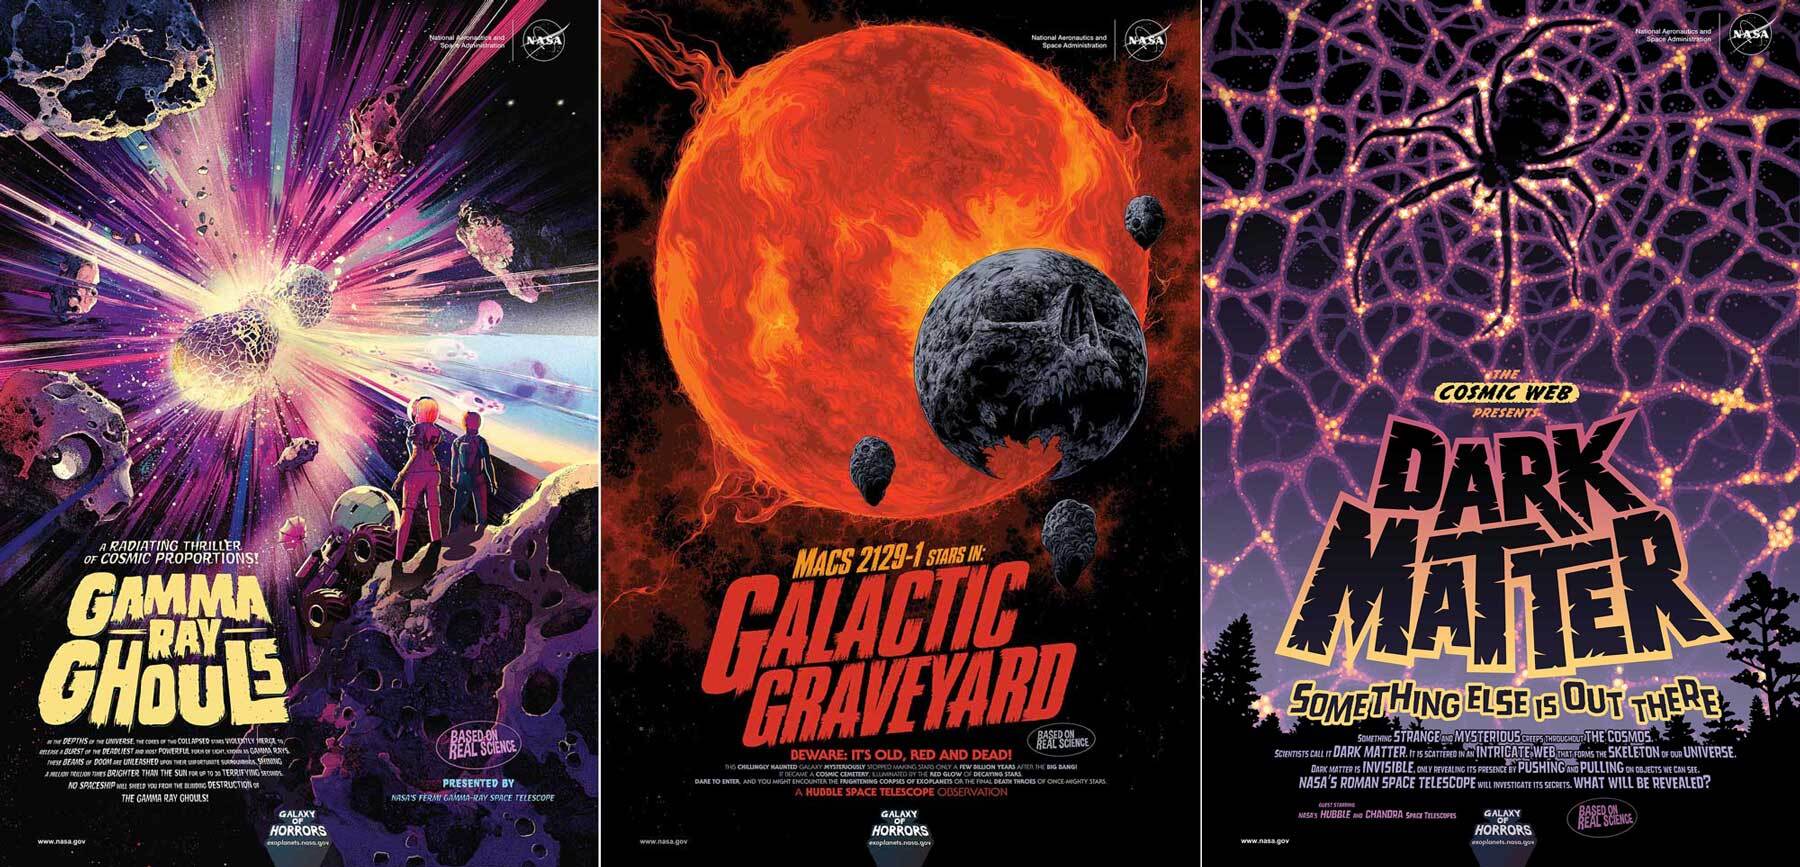 Three new posters based on sci-fi and horror movie ads of the past.